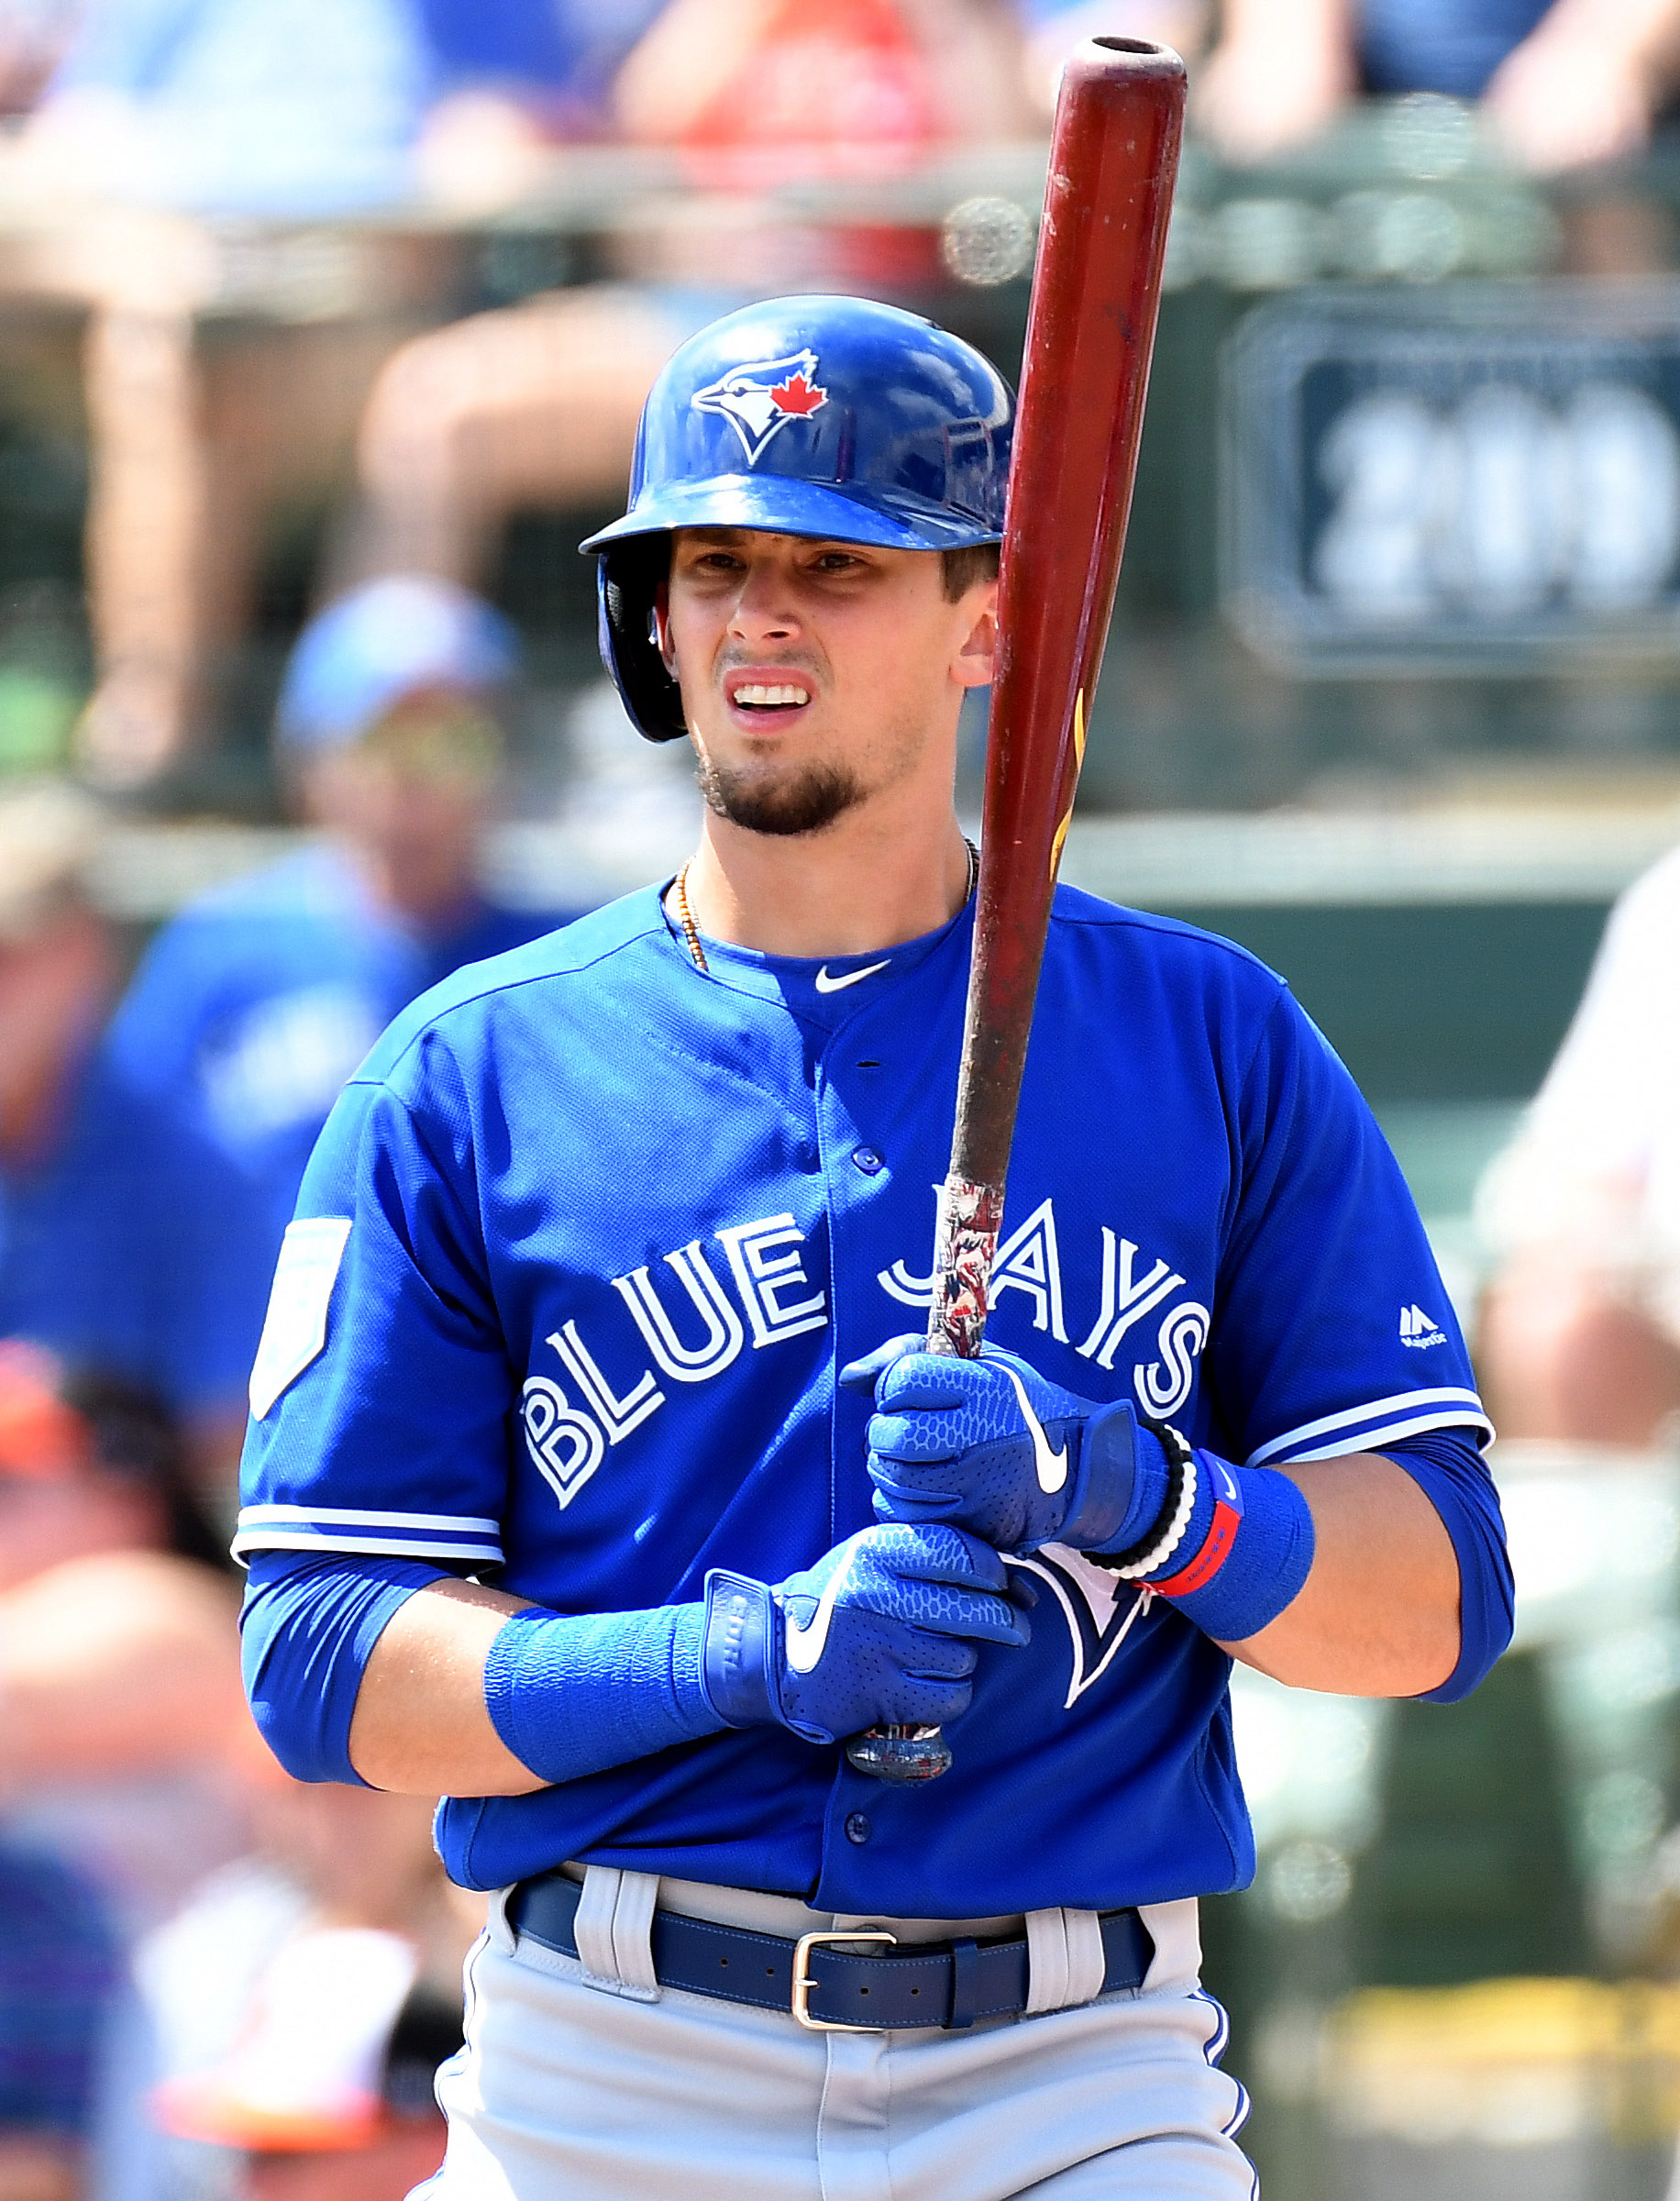 Blue Jays: What to expect from Cavan Biggio in 2022